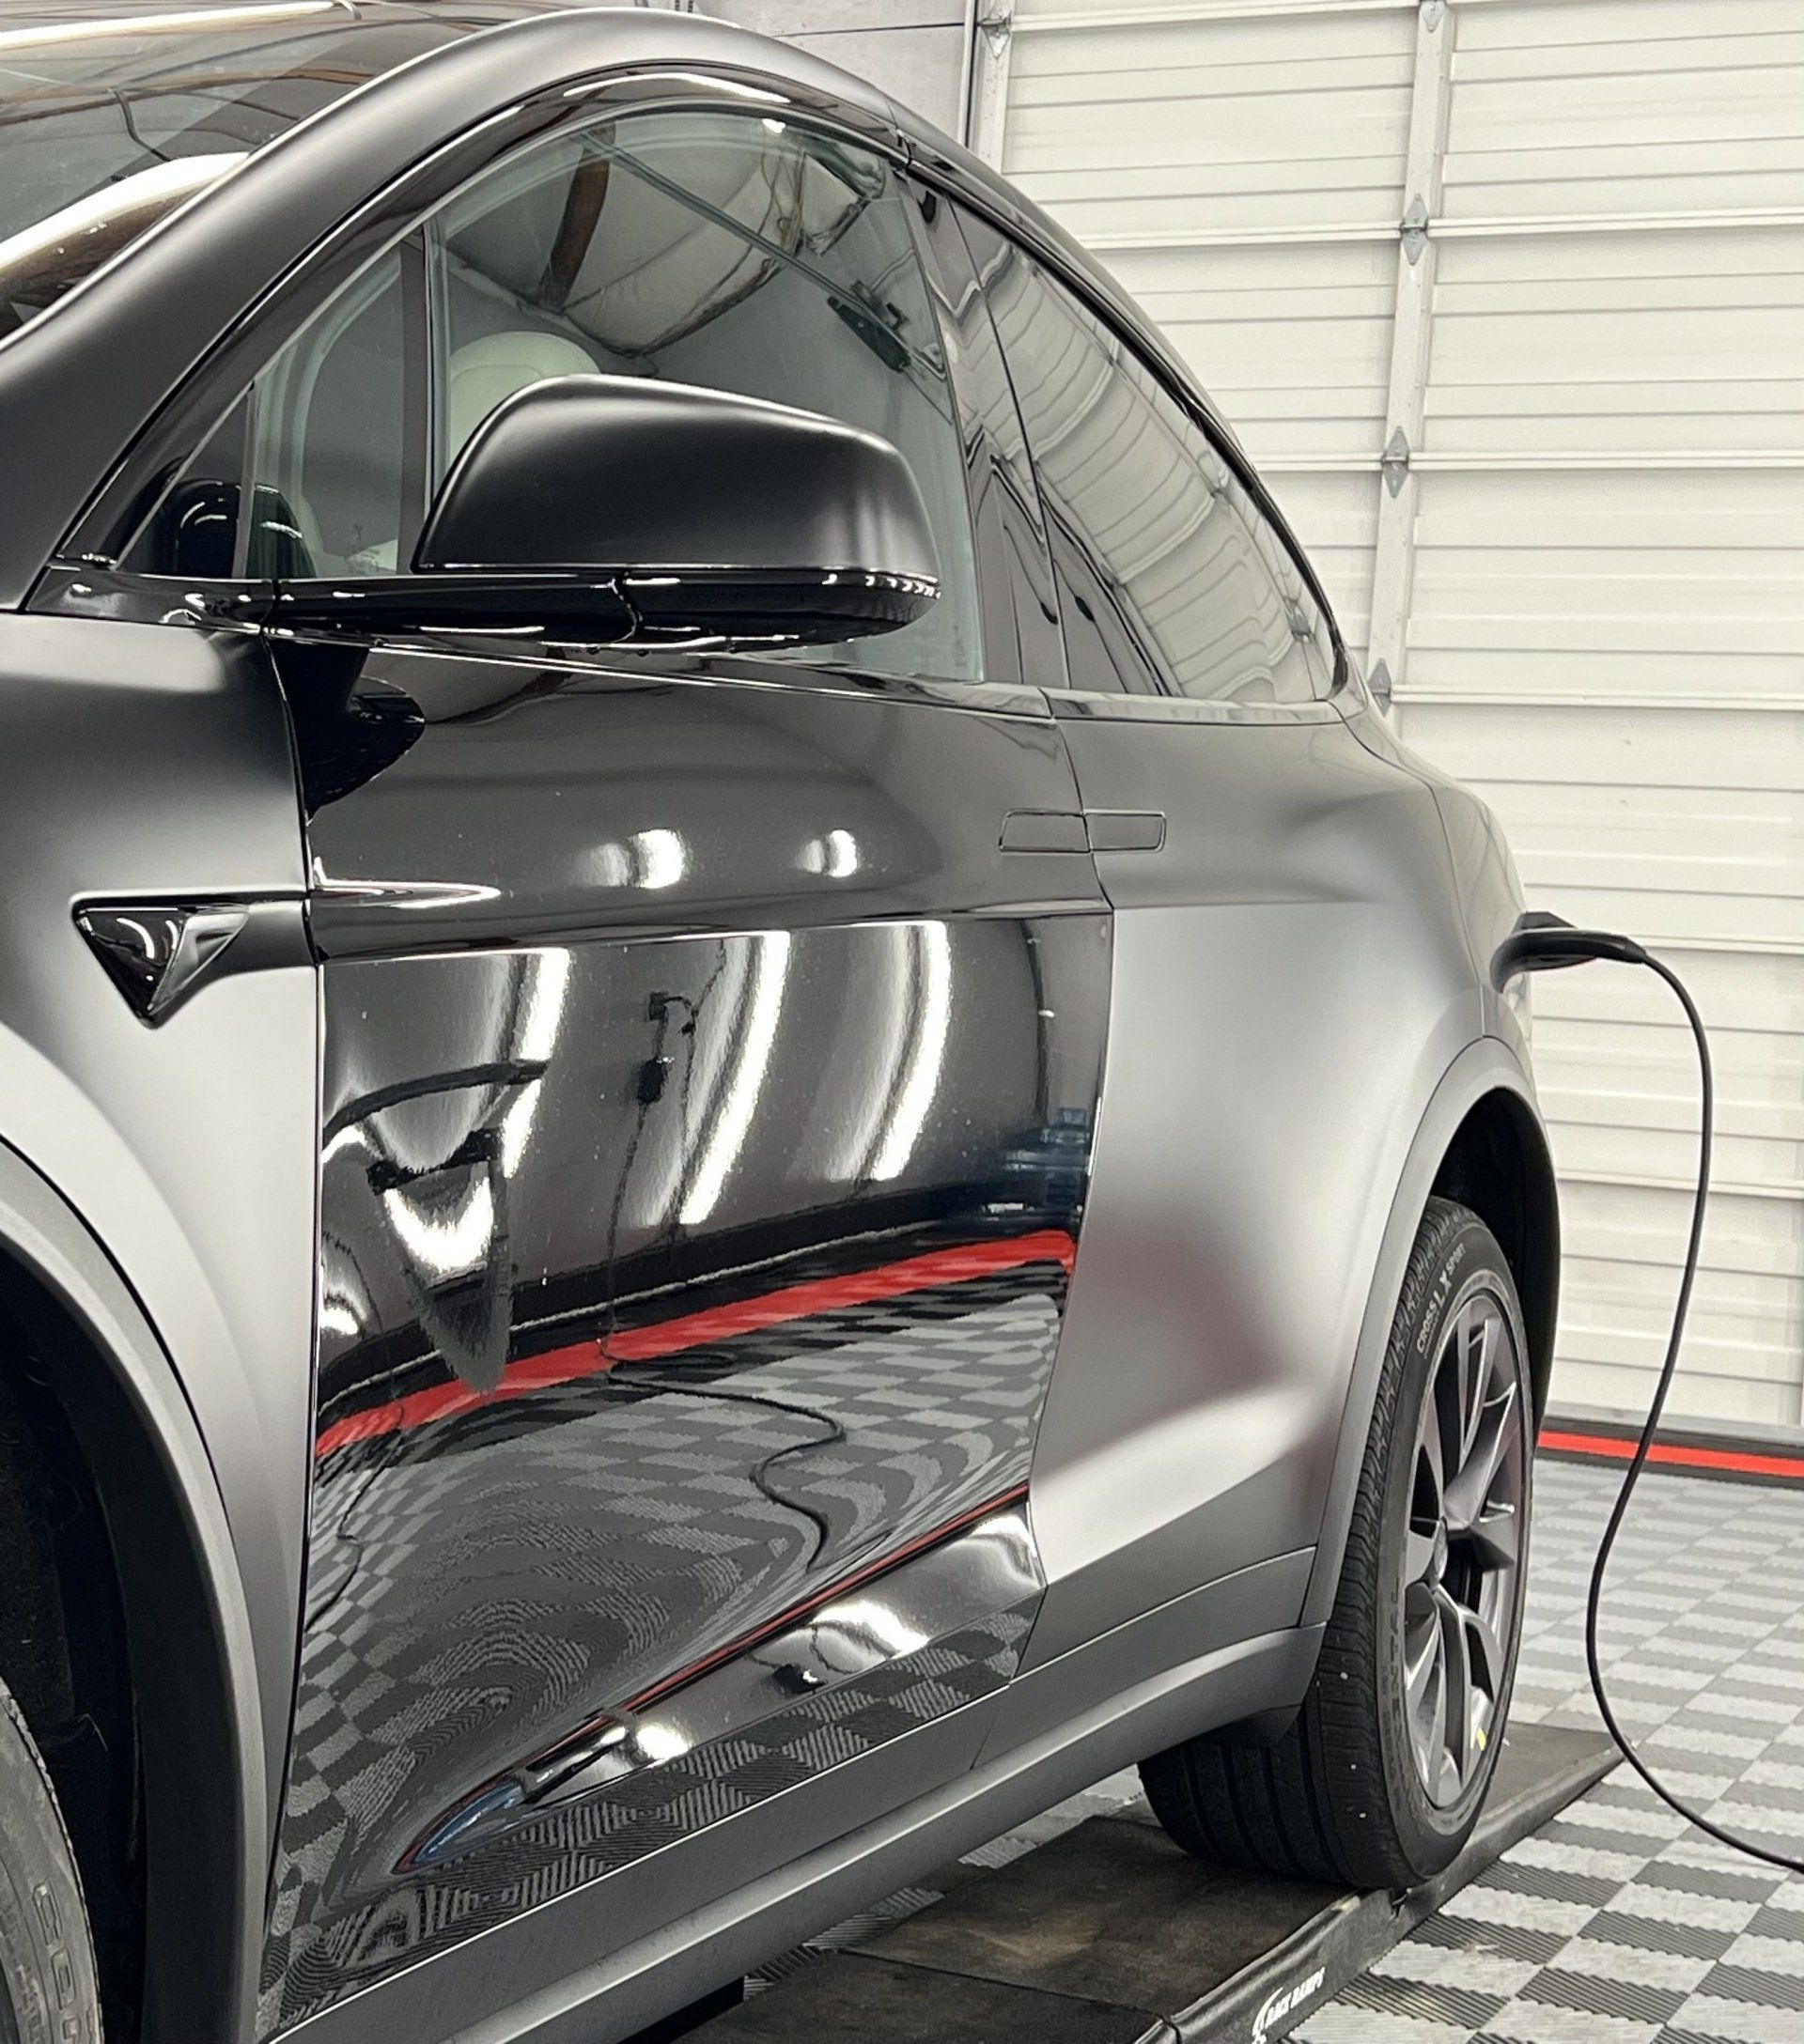 A tesla model x is being charged in a garage